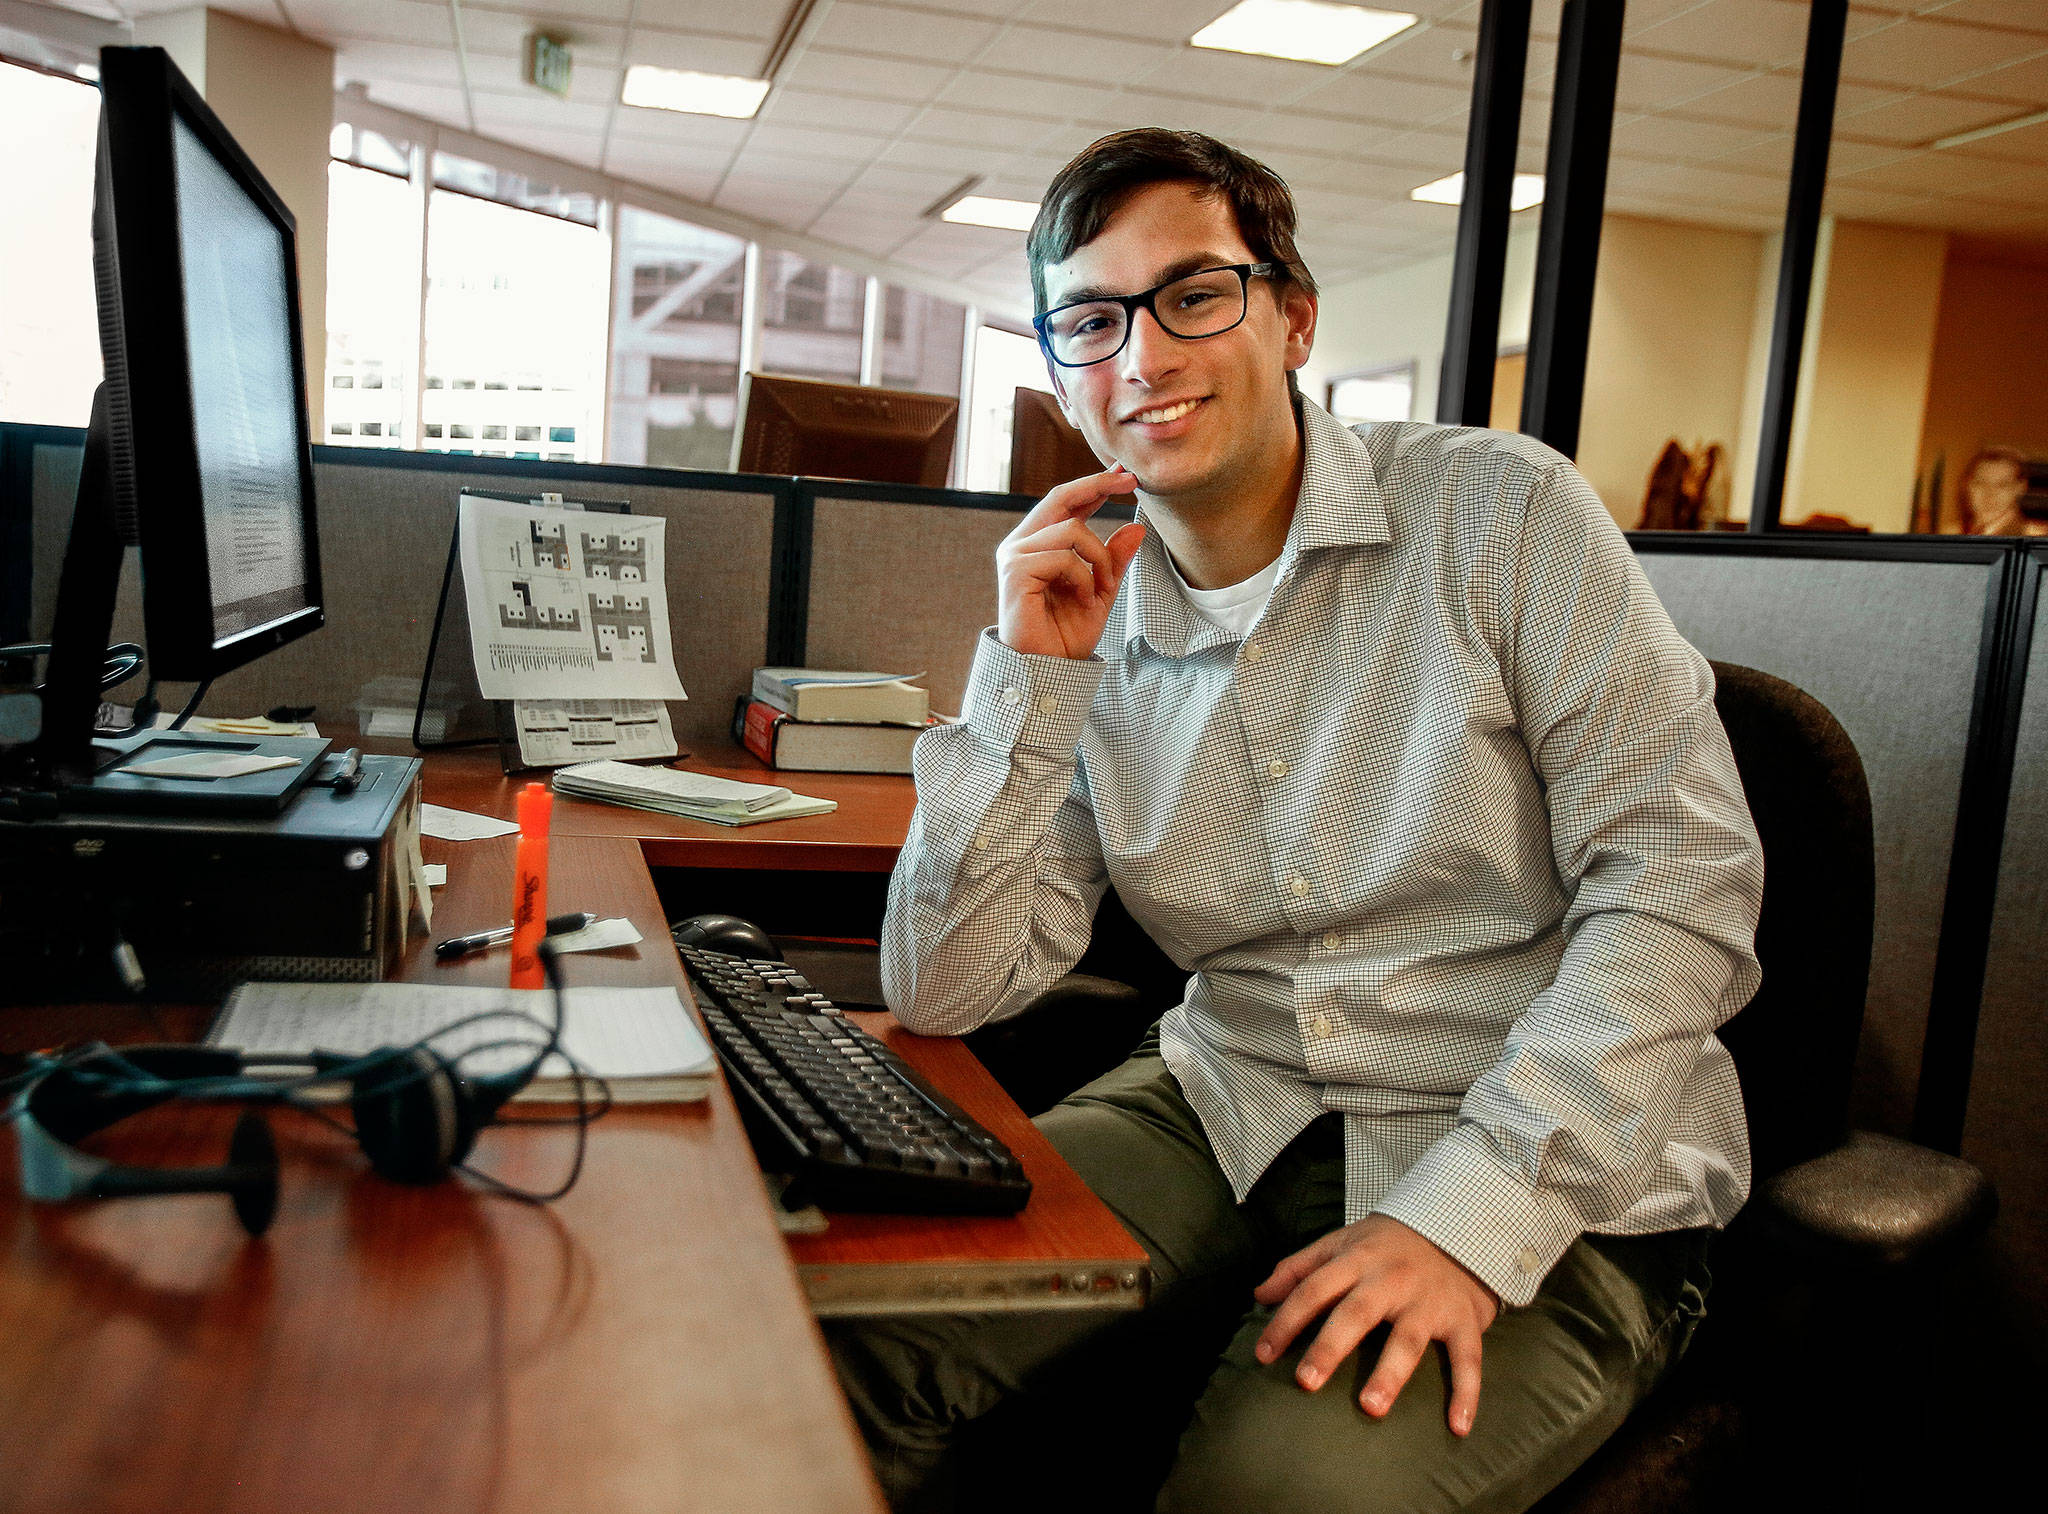 Ian Davis-Leonard was the Herald’s news intern this summer. He was a 3-year-old when columnist Julie Muhlstein featured his family in a column. Ian’s two moms shared their story in 2002. (Dan Bates / The Herald)